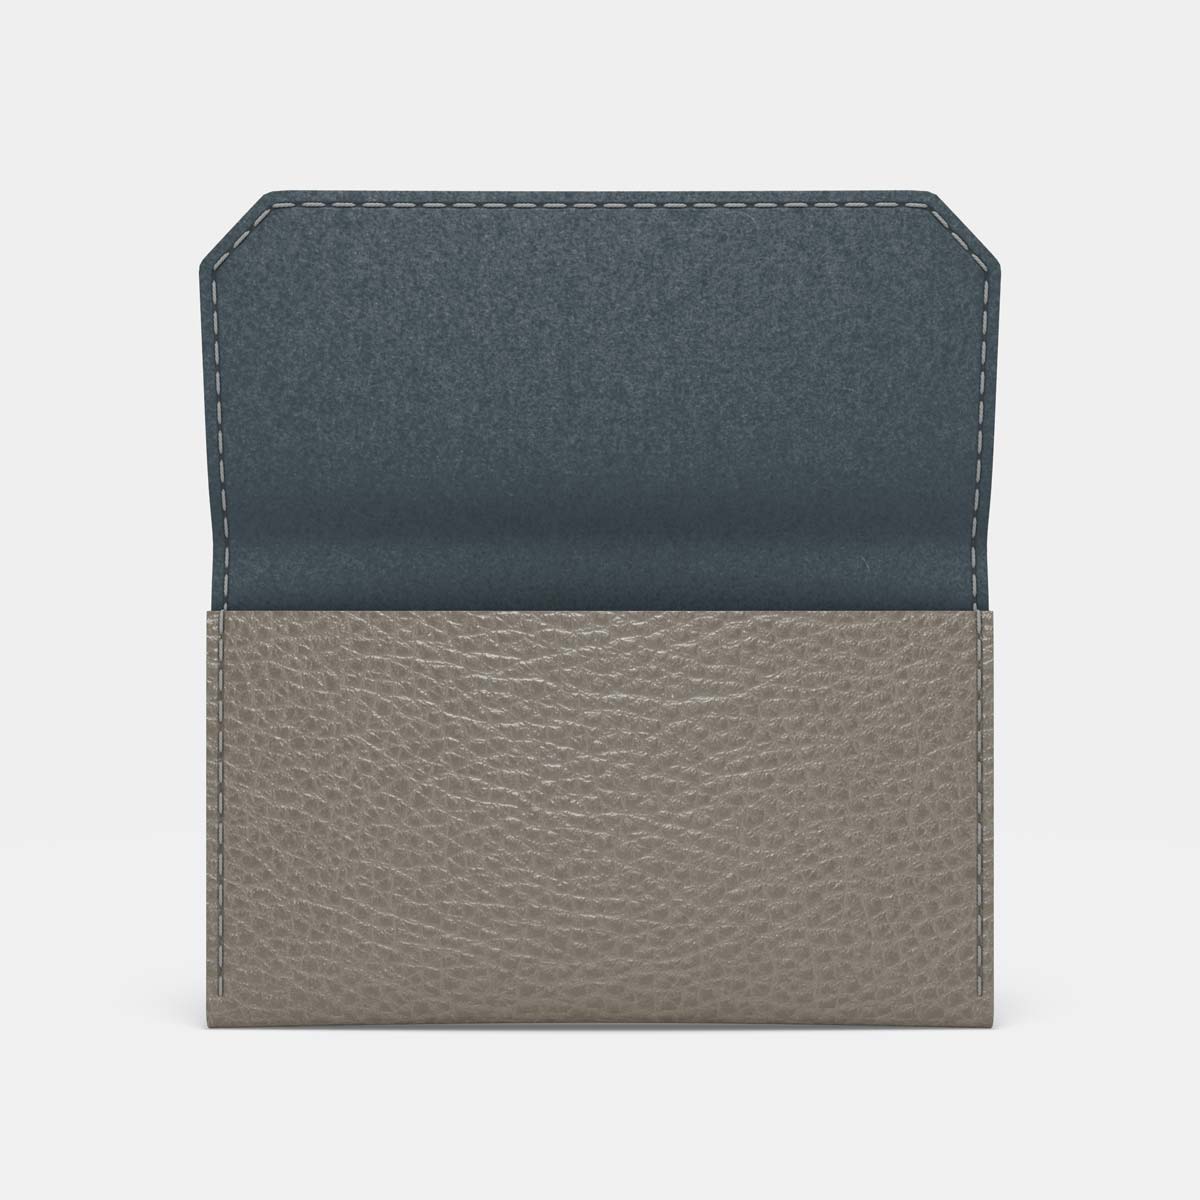 Leather Carry all Wallet - Grey and Grey - RYAN London